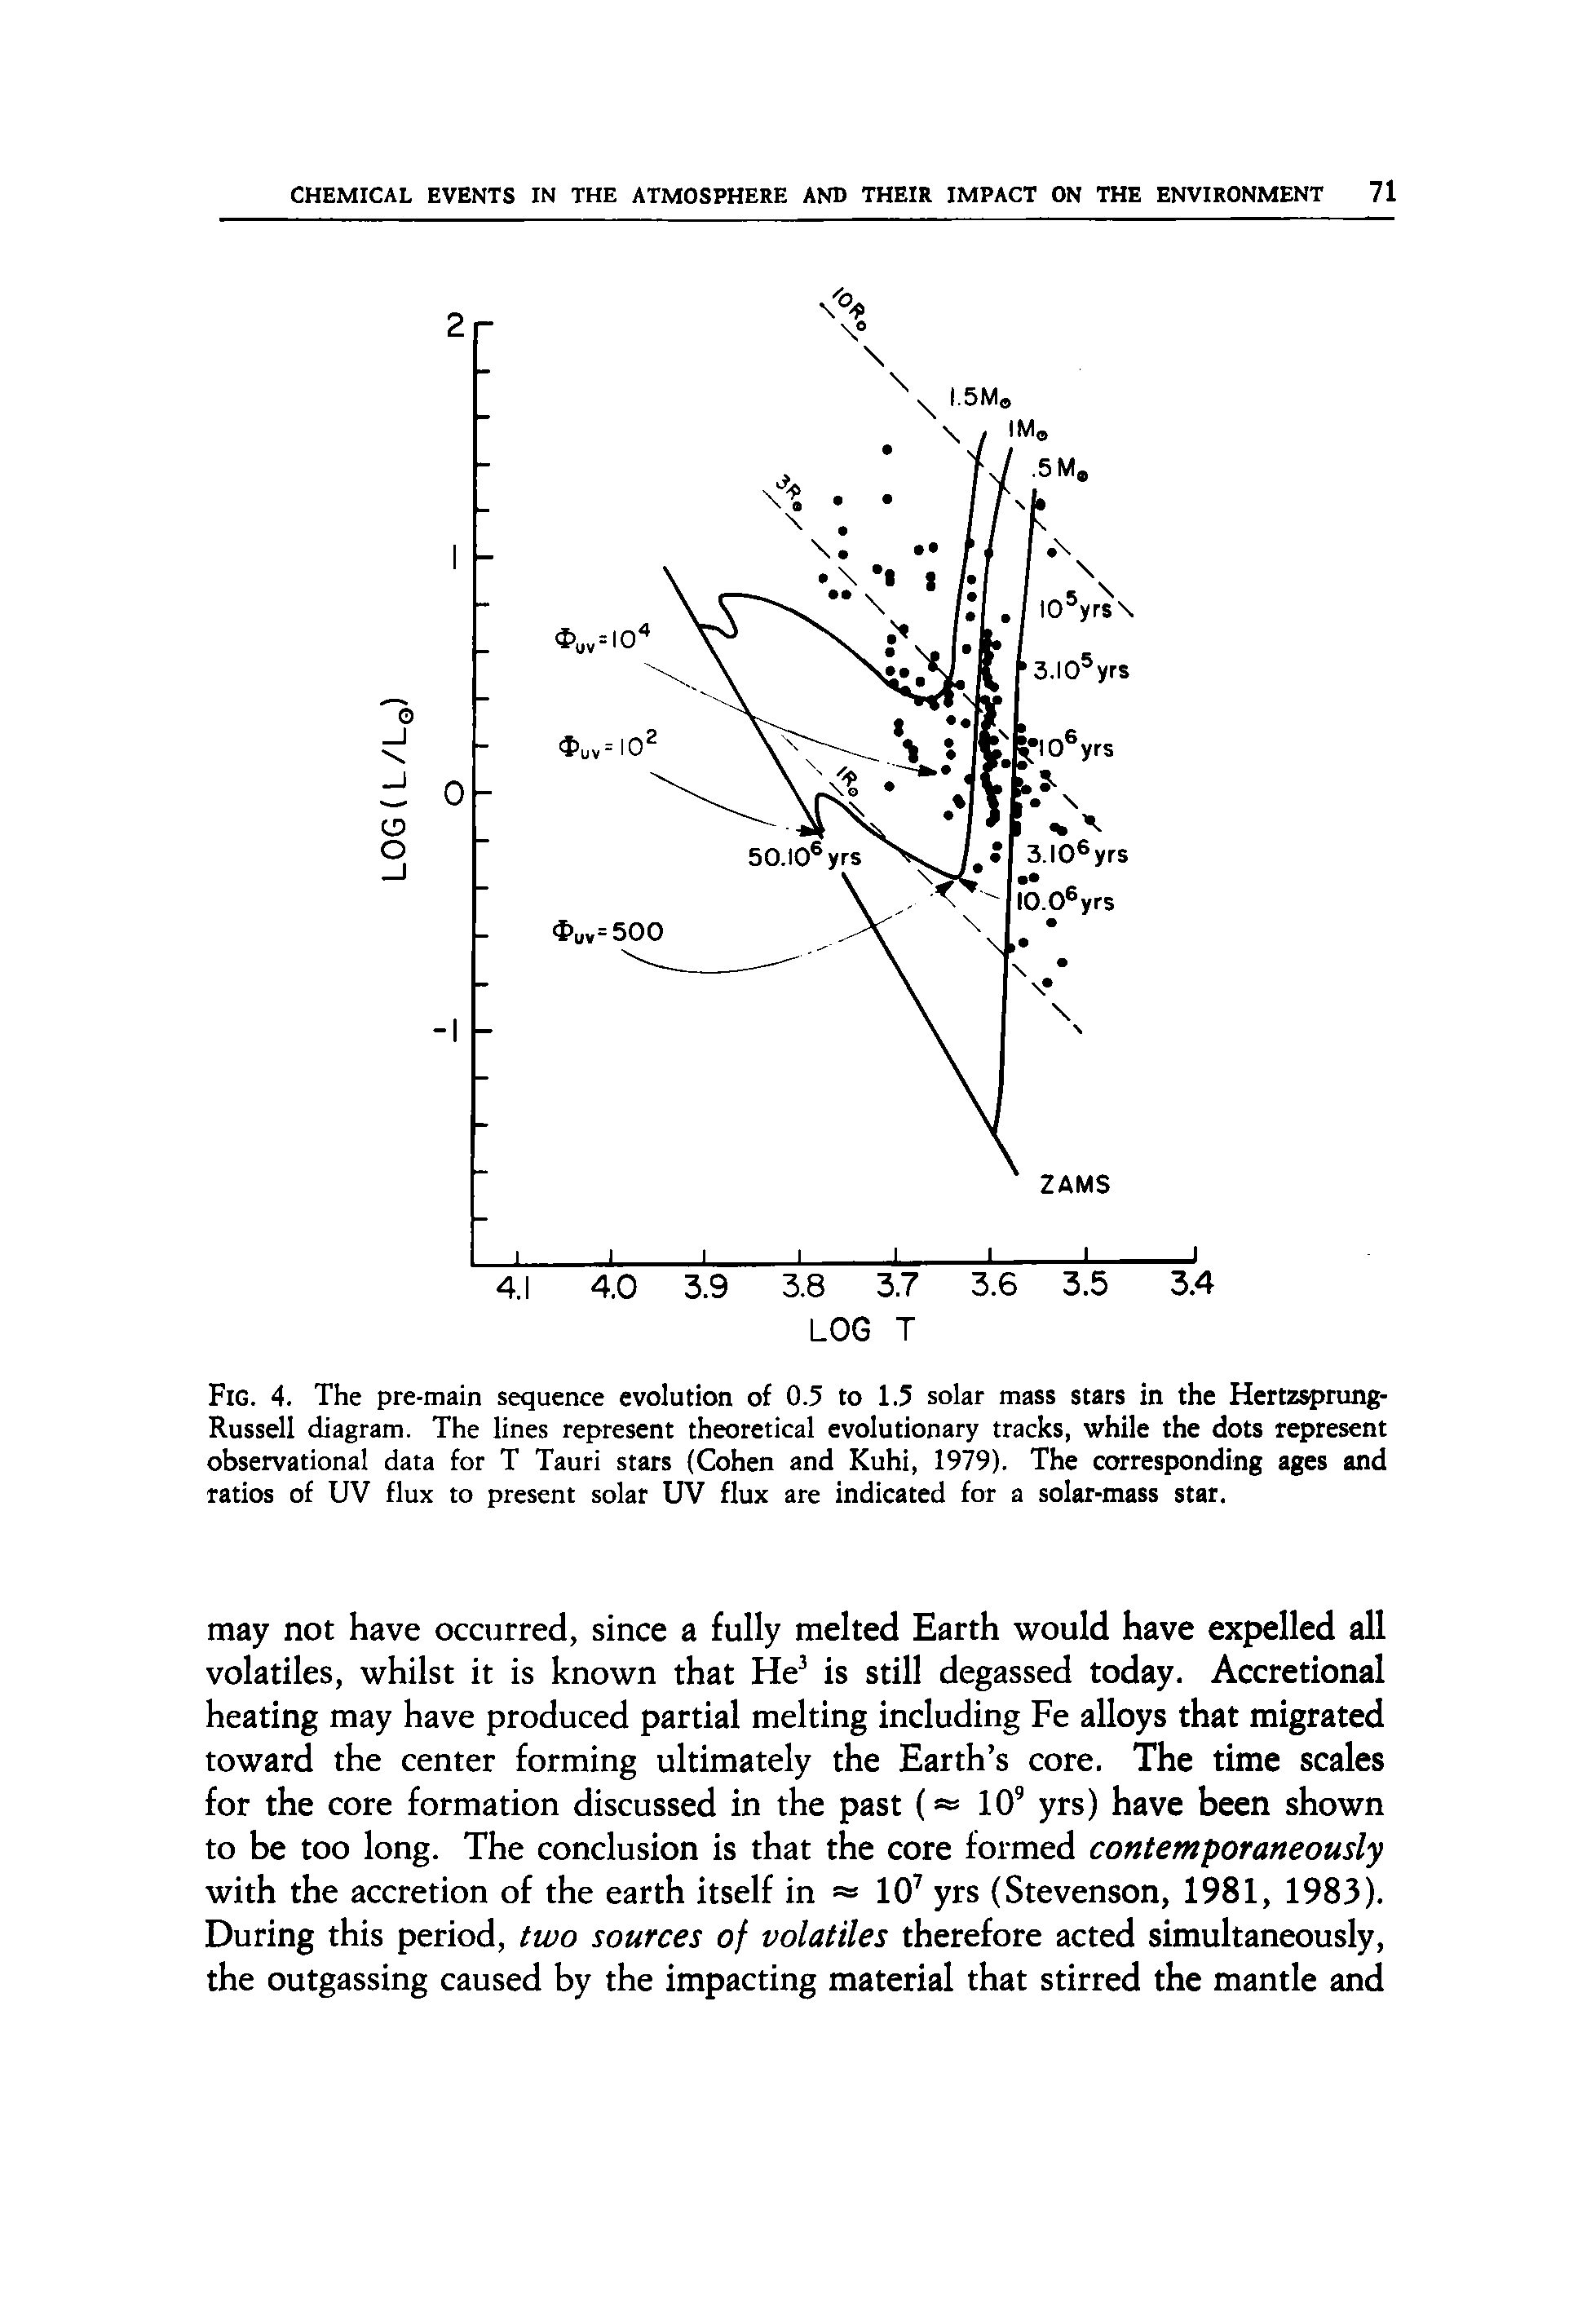 Fig. 4. The pre-main sequence evolution of 0.5 to 1.5 solar mass stars in the Hertzsprung-Russell diagram. The lines represent theoretical evolutionary tracks, while the dots represent observational data for T Tauri stars (Cohen and Kuhi, 1979). The corresponding ages and ratios of UV flux to present solar UV flux are indicated for a solar-mass star.